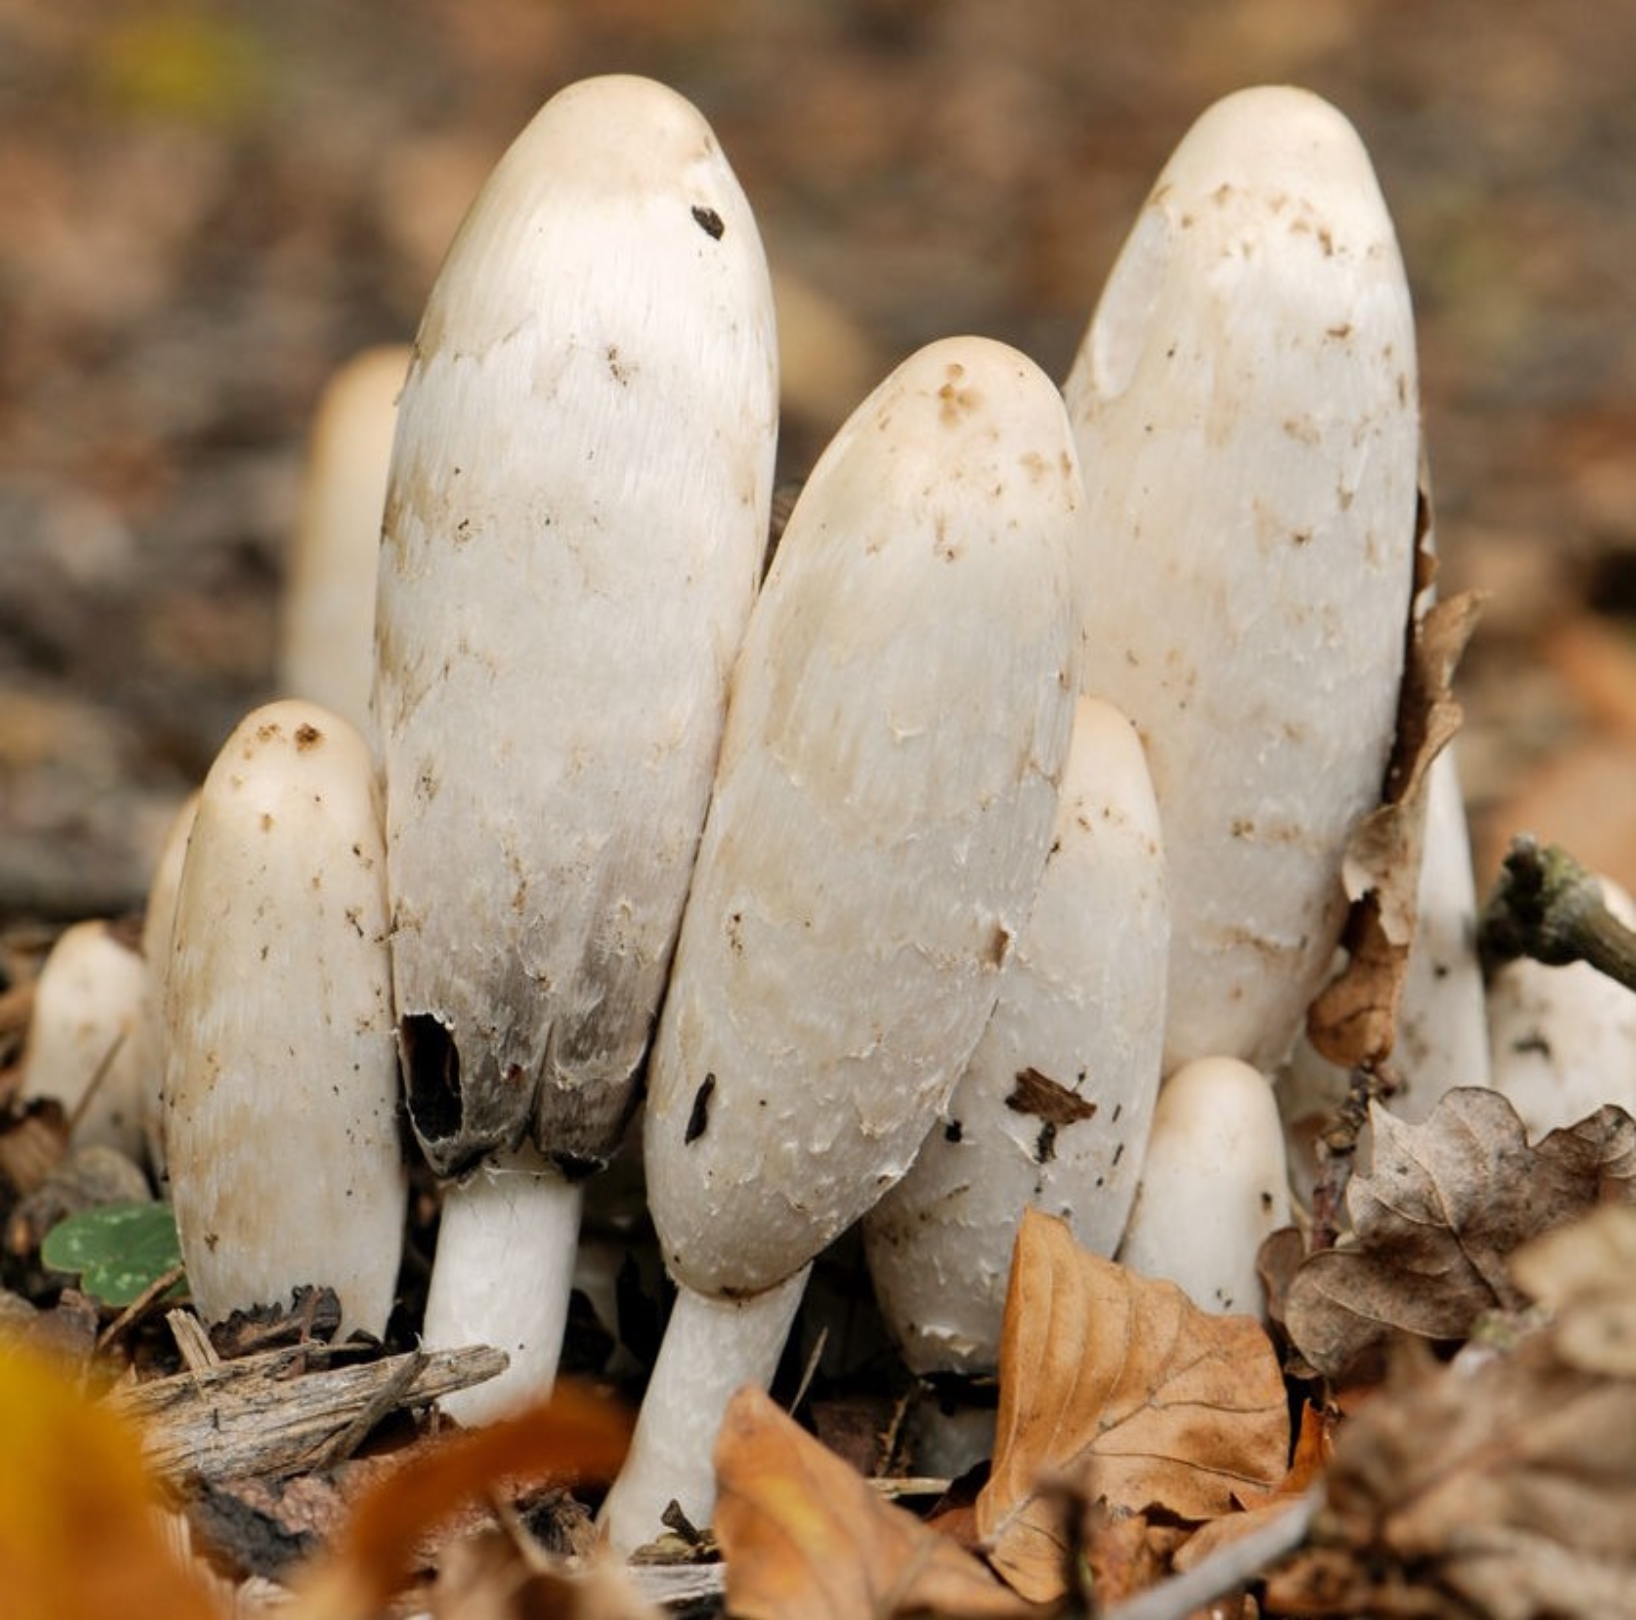 Shaggy ink caps (Coprinus comatus) on leaf litter. Oval-shaped, all white mushroom stalk and cap.